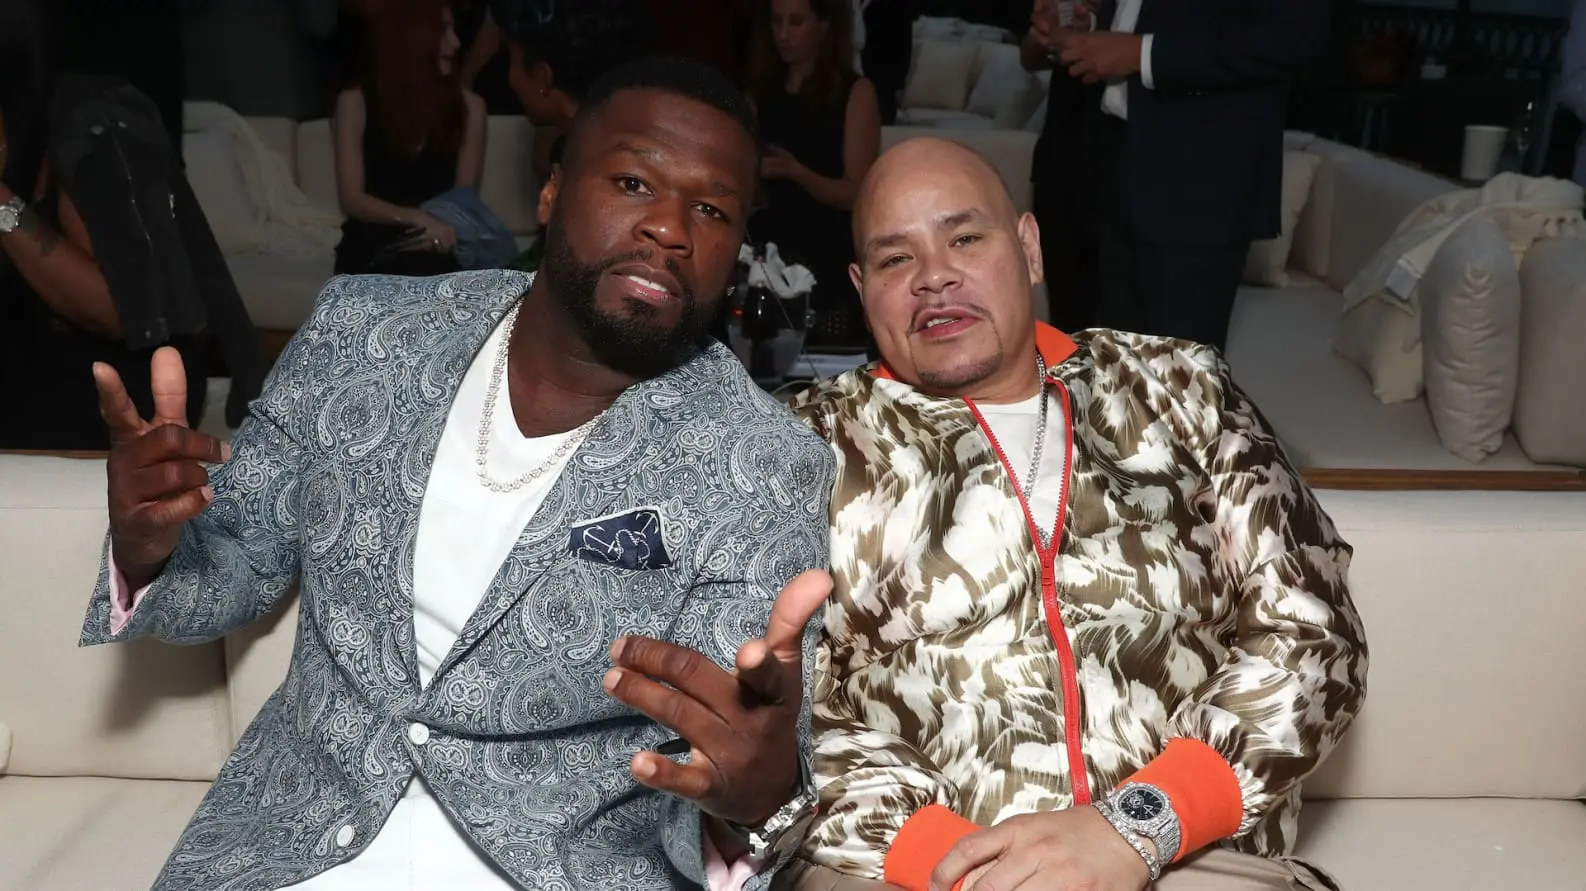 50 Cent and Fat Joe Seated Next to Each Other During Christmas New York Knicks Game [Photos + Video]